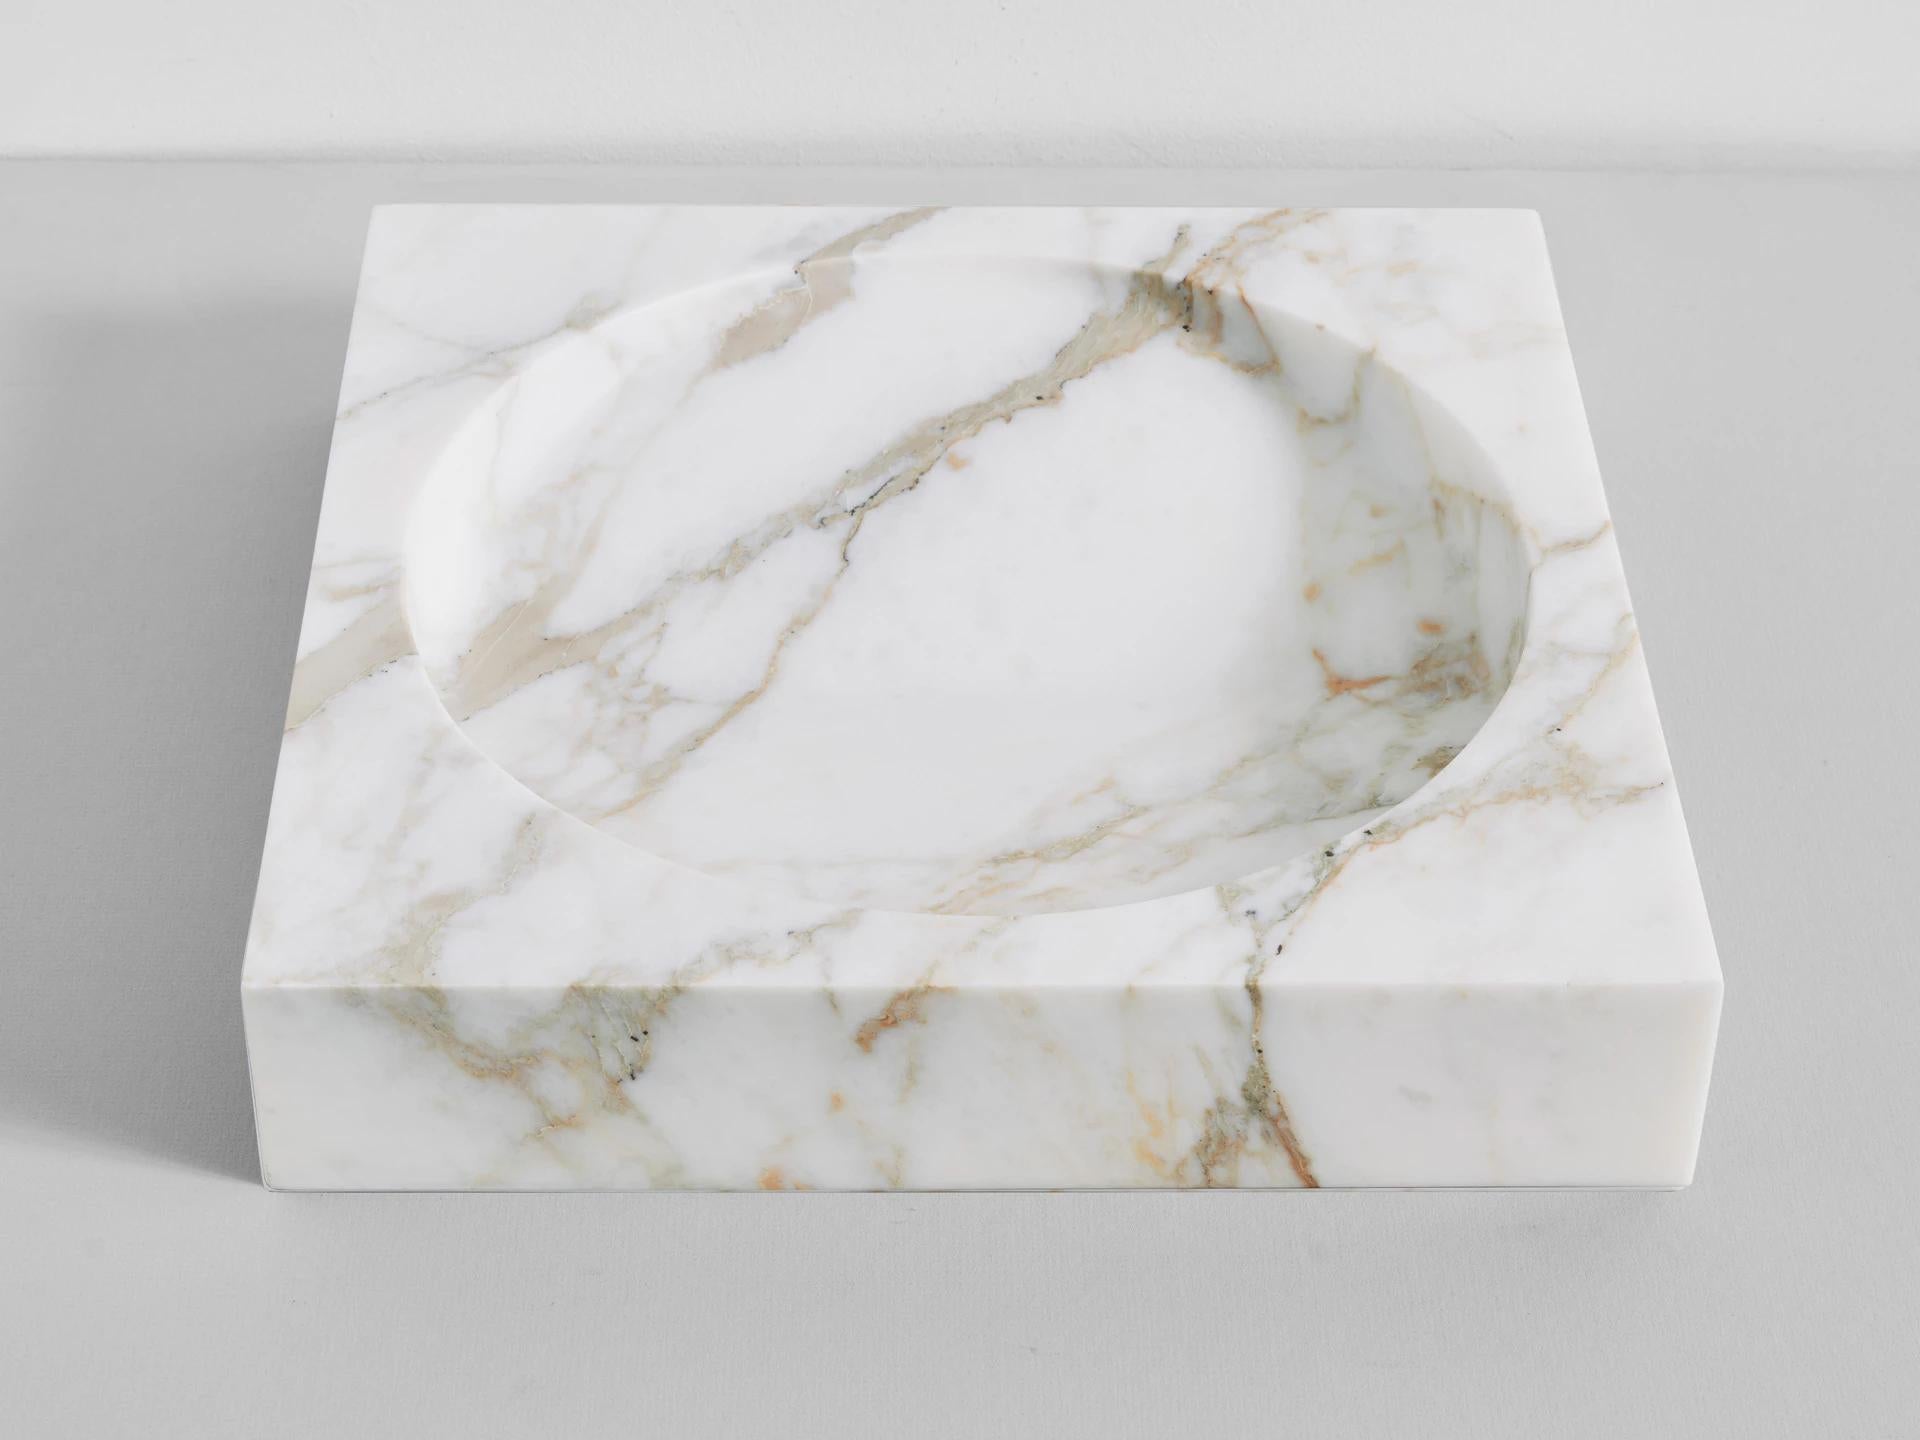 Marble Block Big Poche Rond by Henry Wilson
Dimensions: W 35 x D 35 x H 7 cm
Materials: Marble

This sculptural item is handmade in Sydney Australia.

Each piece is manufactured in natural stone, meaning variations of the pattern in the stone will